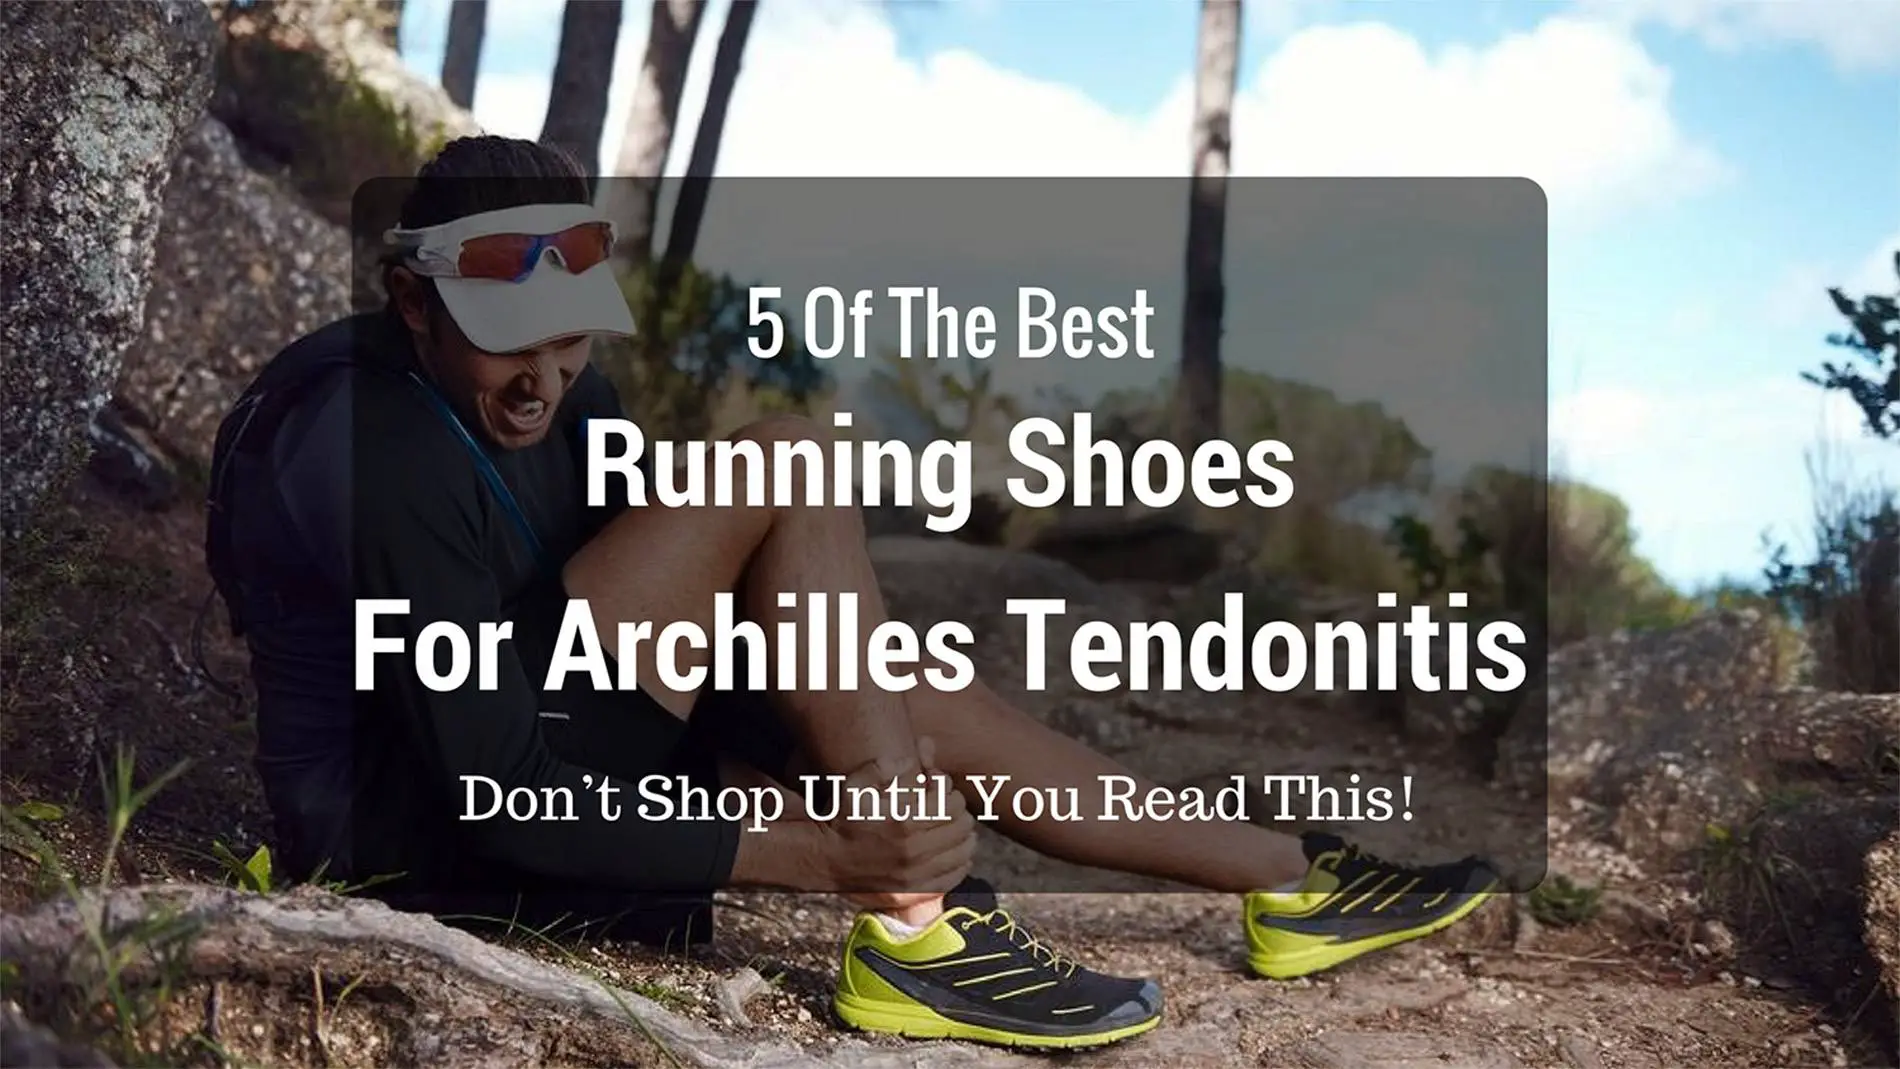 5 Of The Best Running Shoes for 